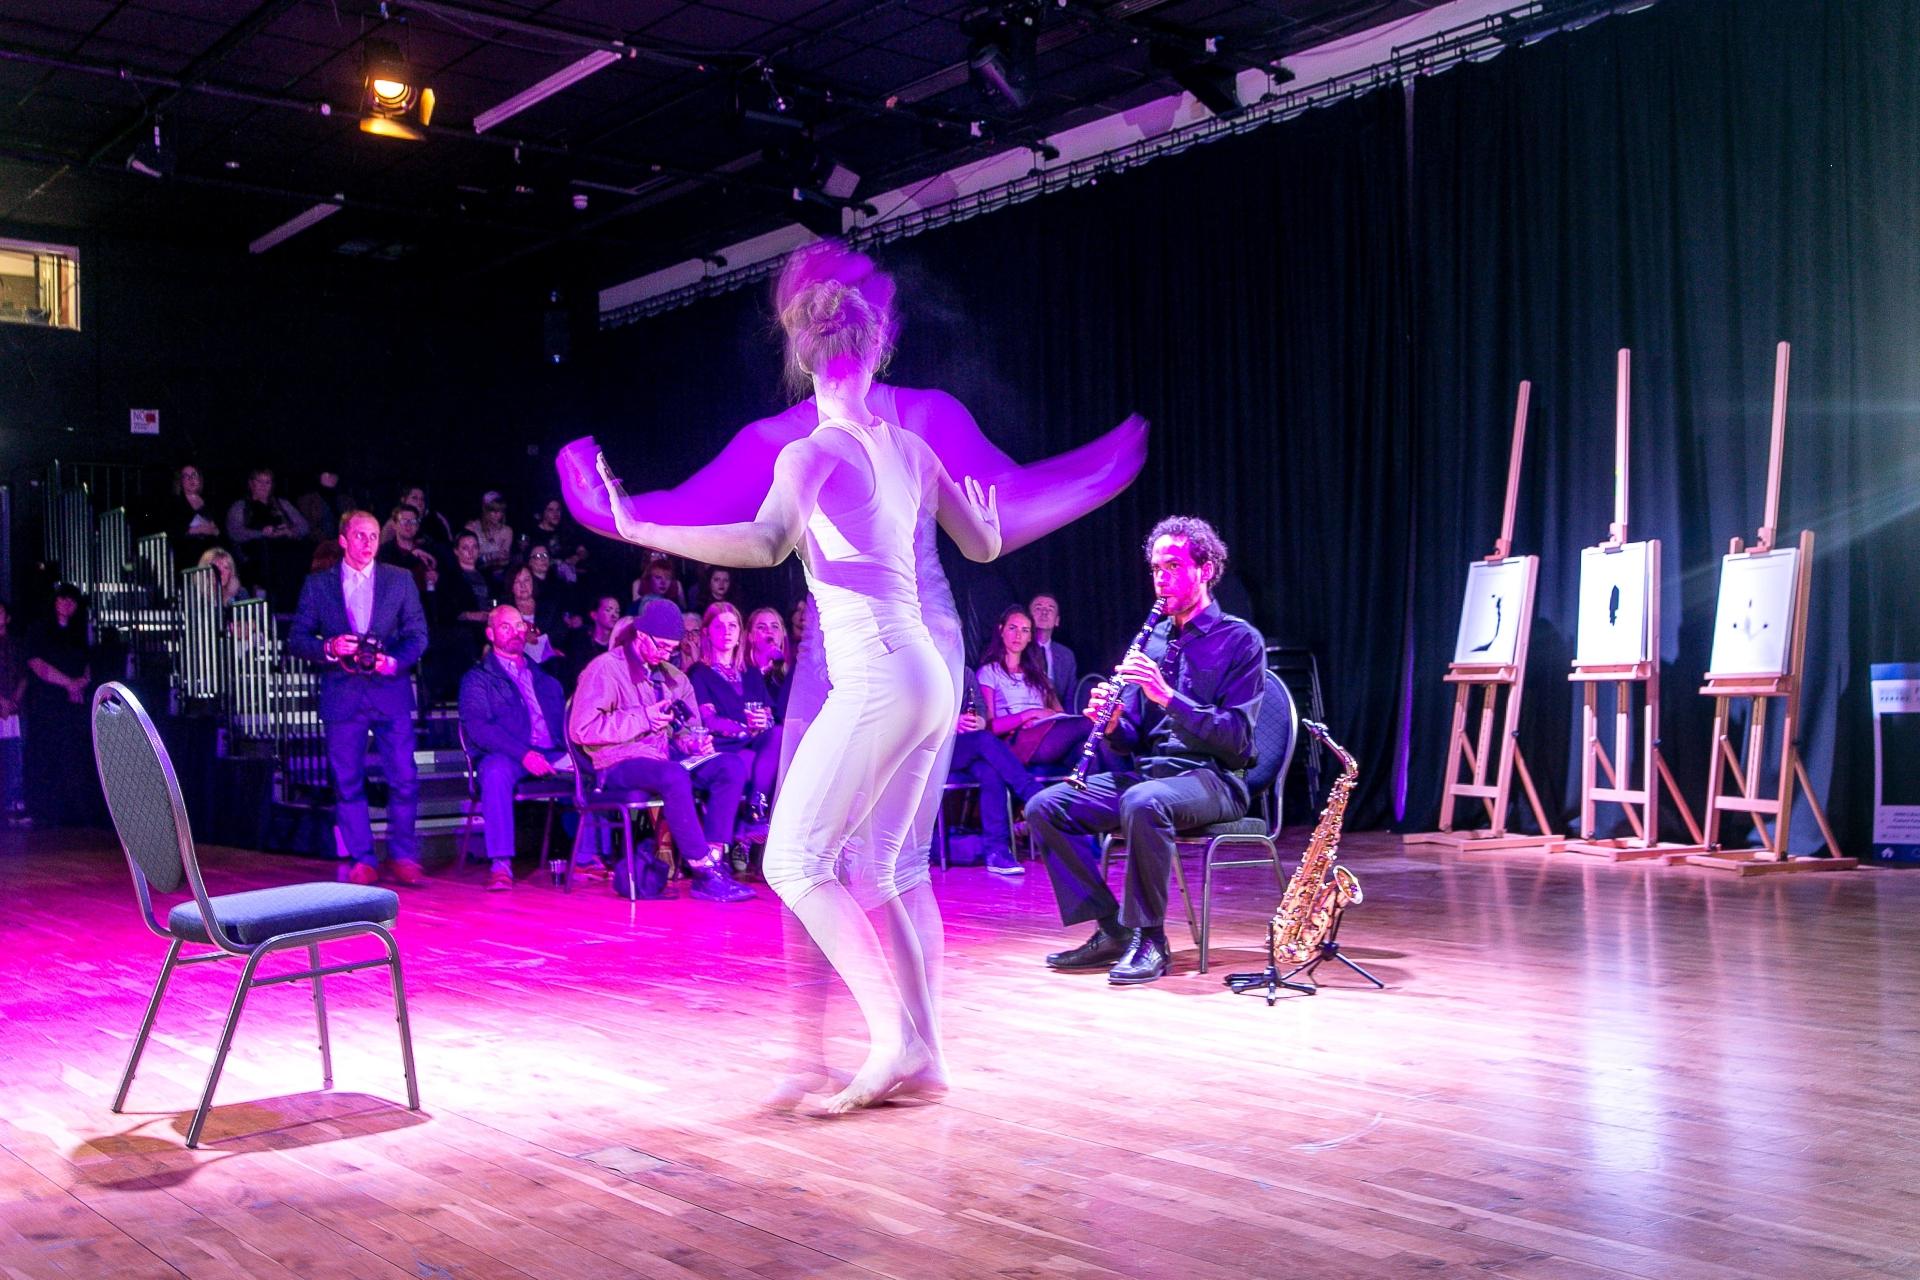 A woman dancing with an audience watching